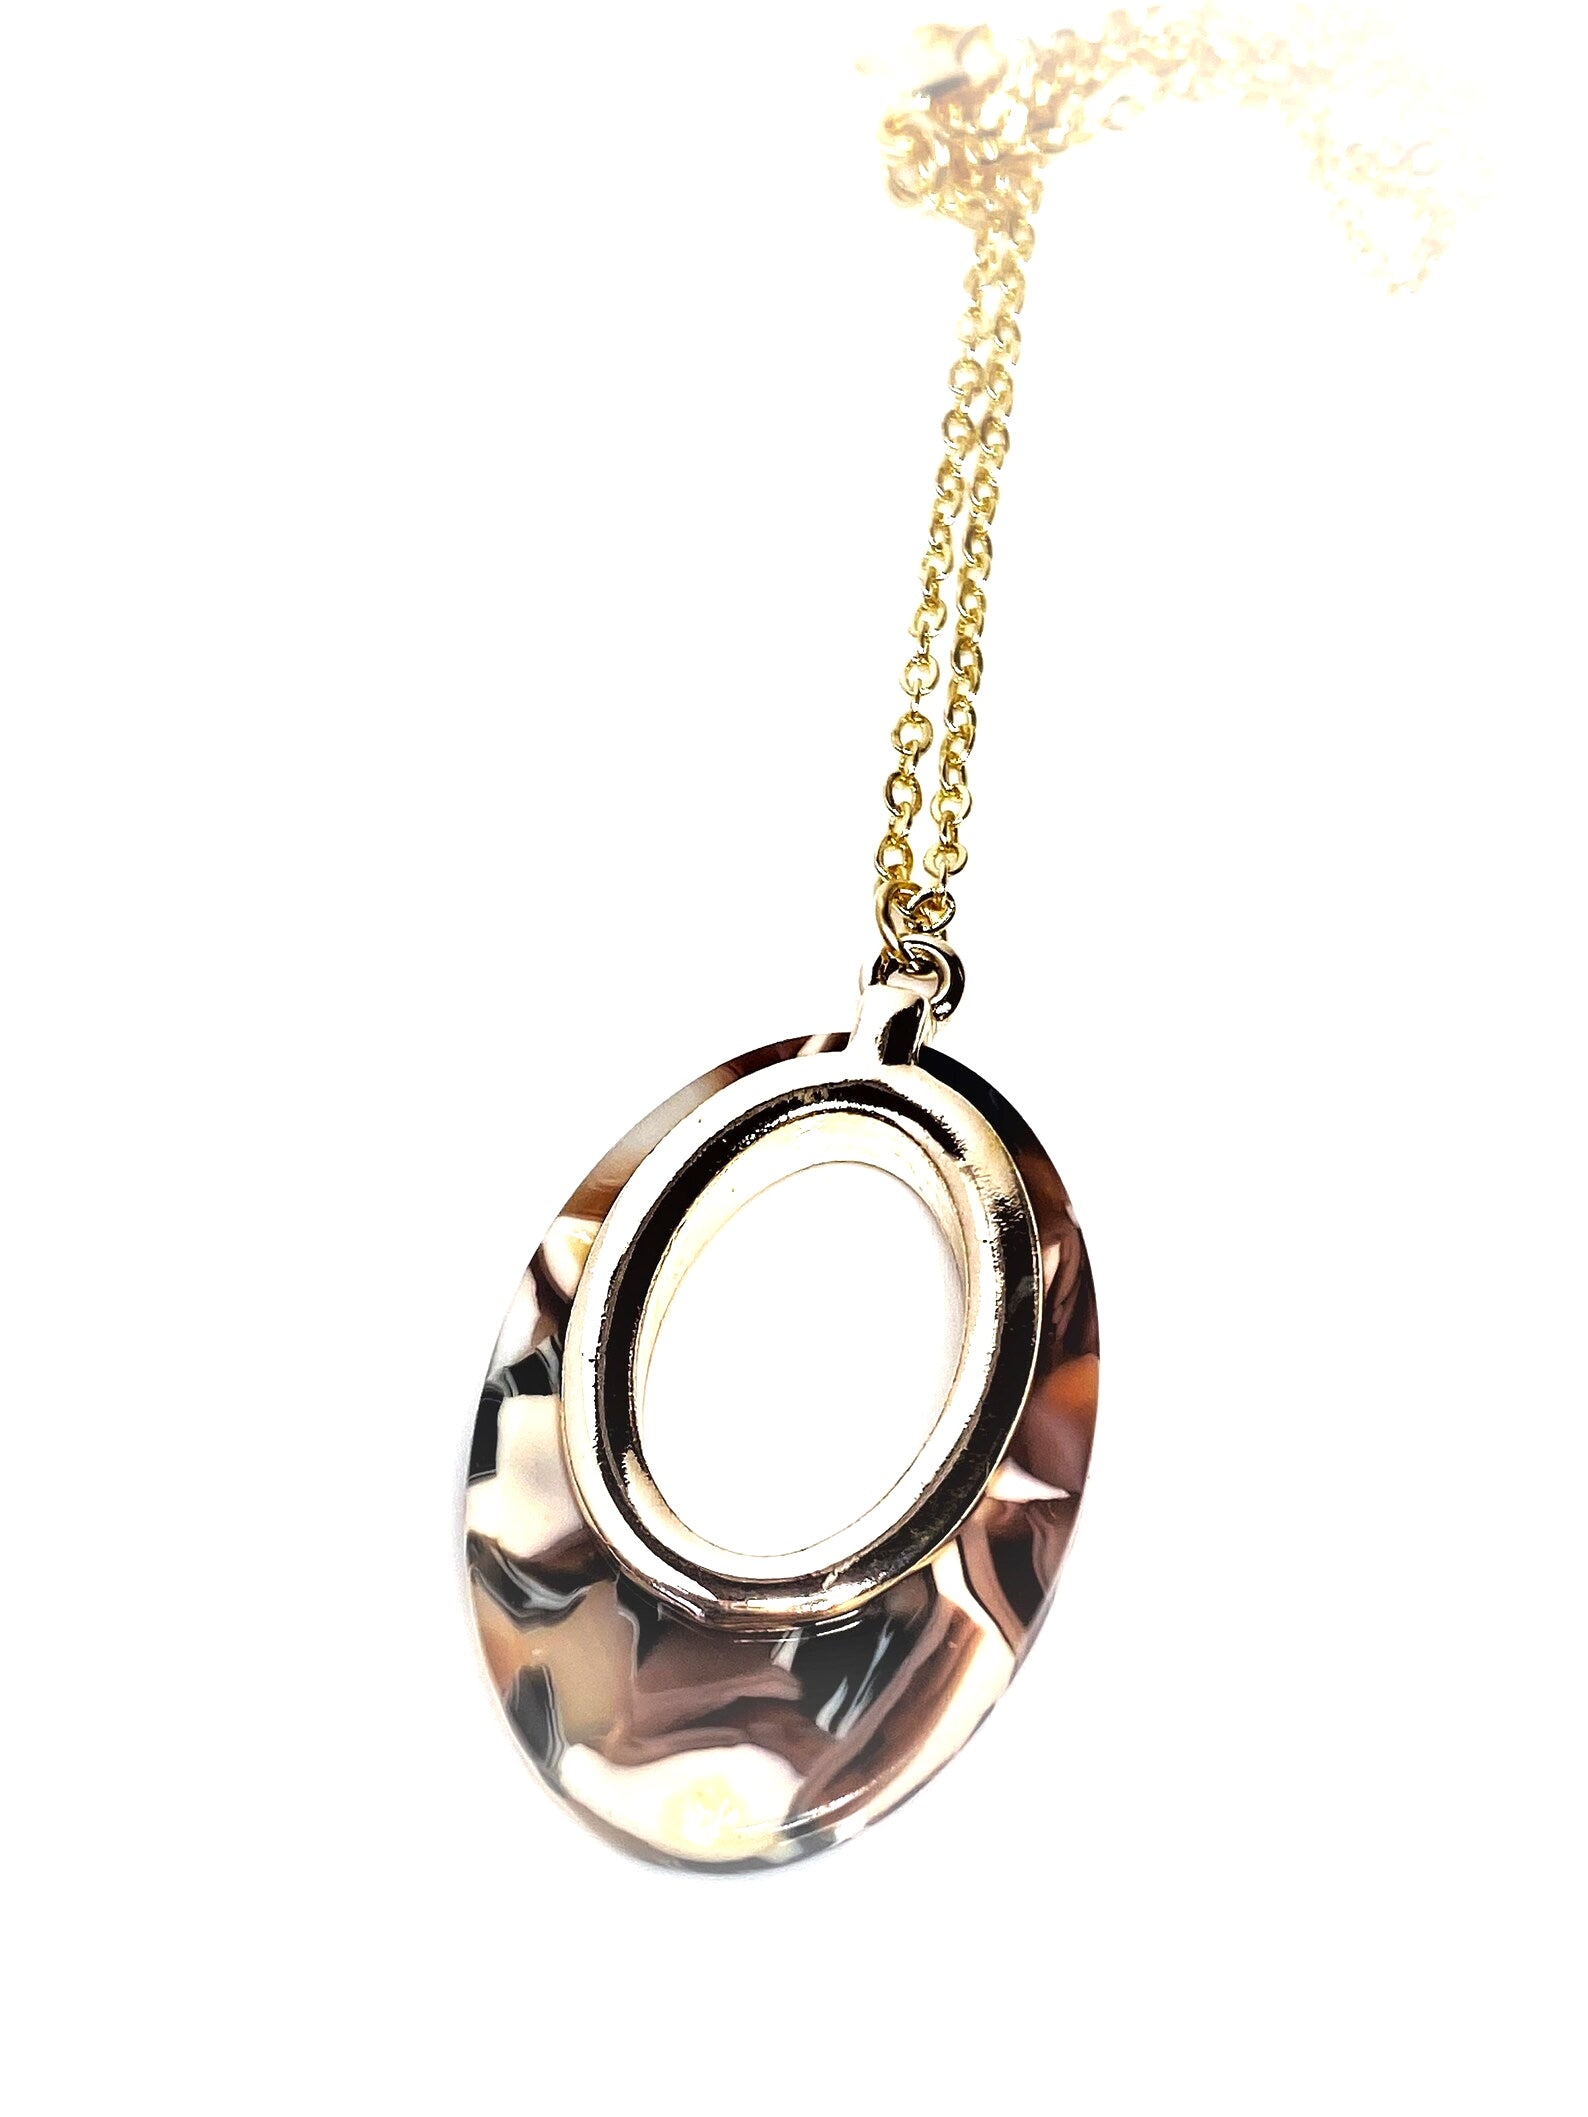 Brown Cream Gold Acrylic Pendant, 14kt Gold Filled, Tortoise Shell Oval Pendant, Women Birthday, Necklaces for Women, Acetate Necklace